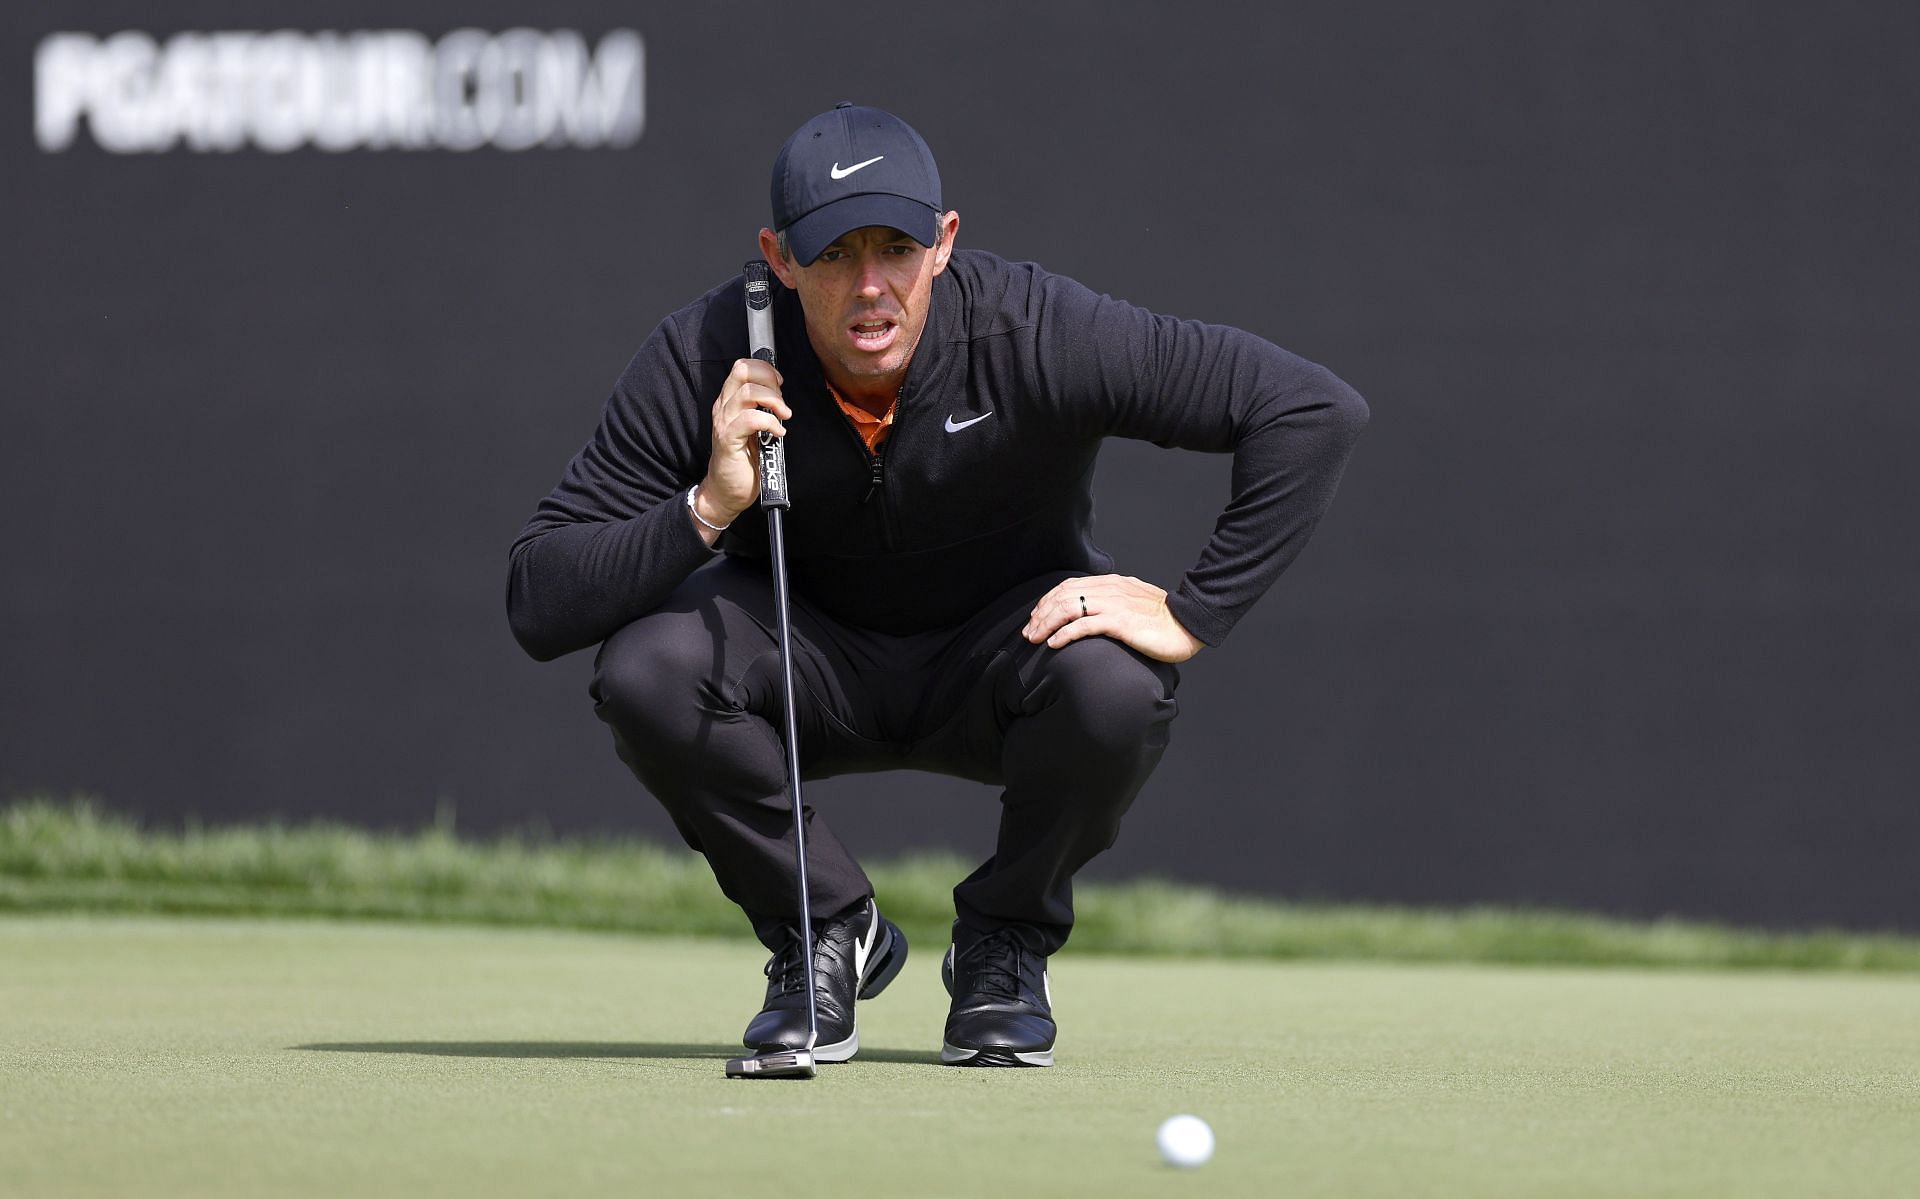 Rory McIlroy vented on Full Swing 2